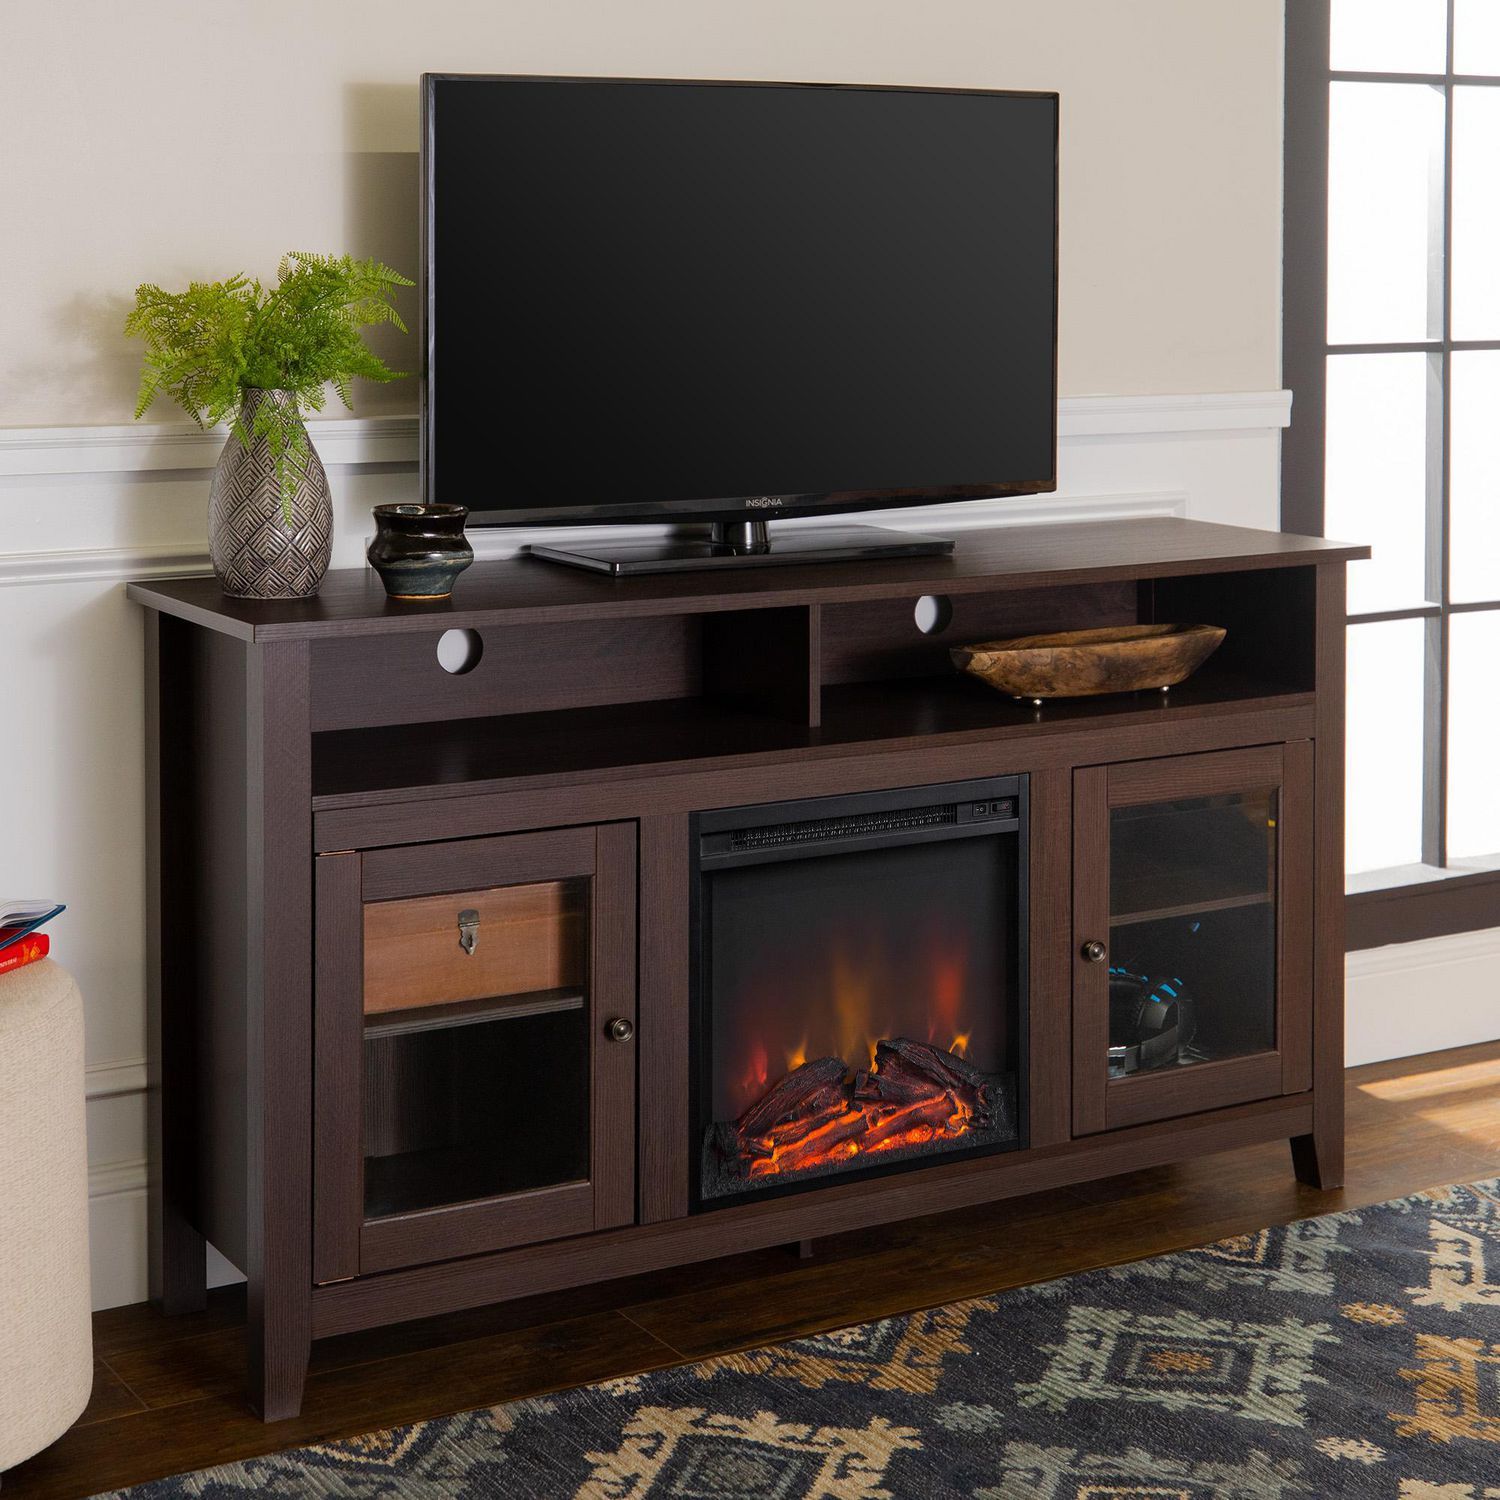 Manor Park Modern Highboy Fireplace Tv Stand For Tvs Up To With Avenir Tv Stands For Tvs Up To 60" (View 3 of 15)